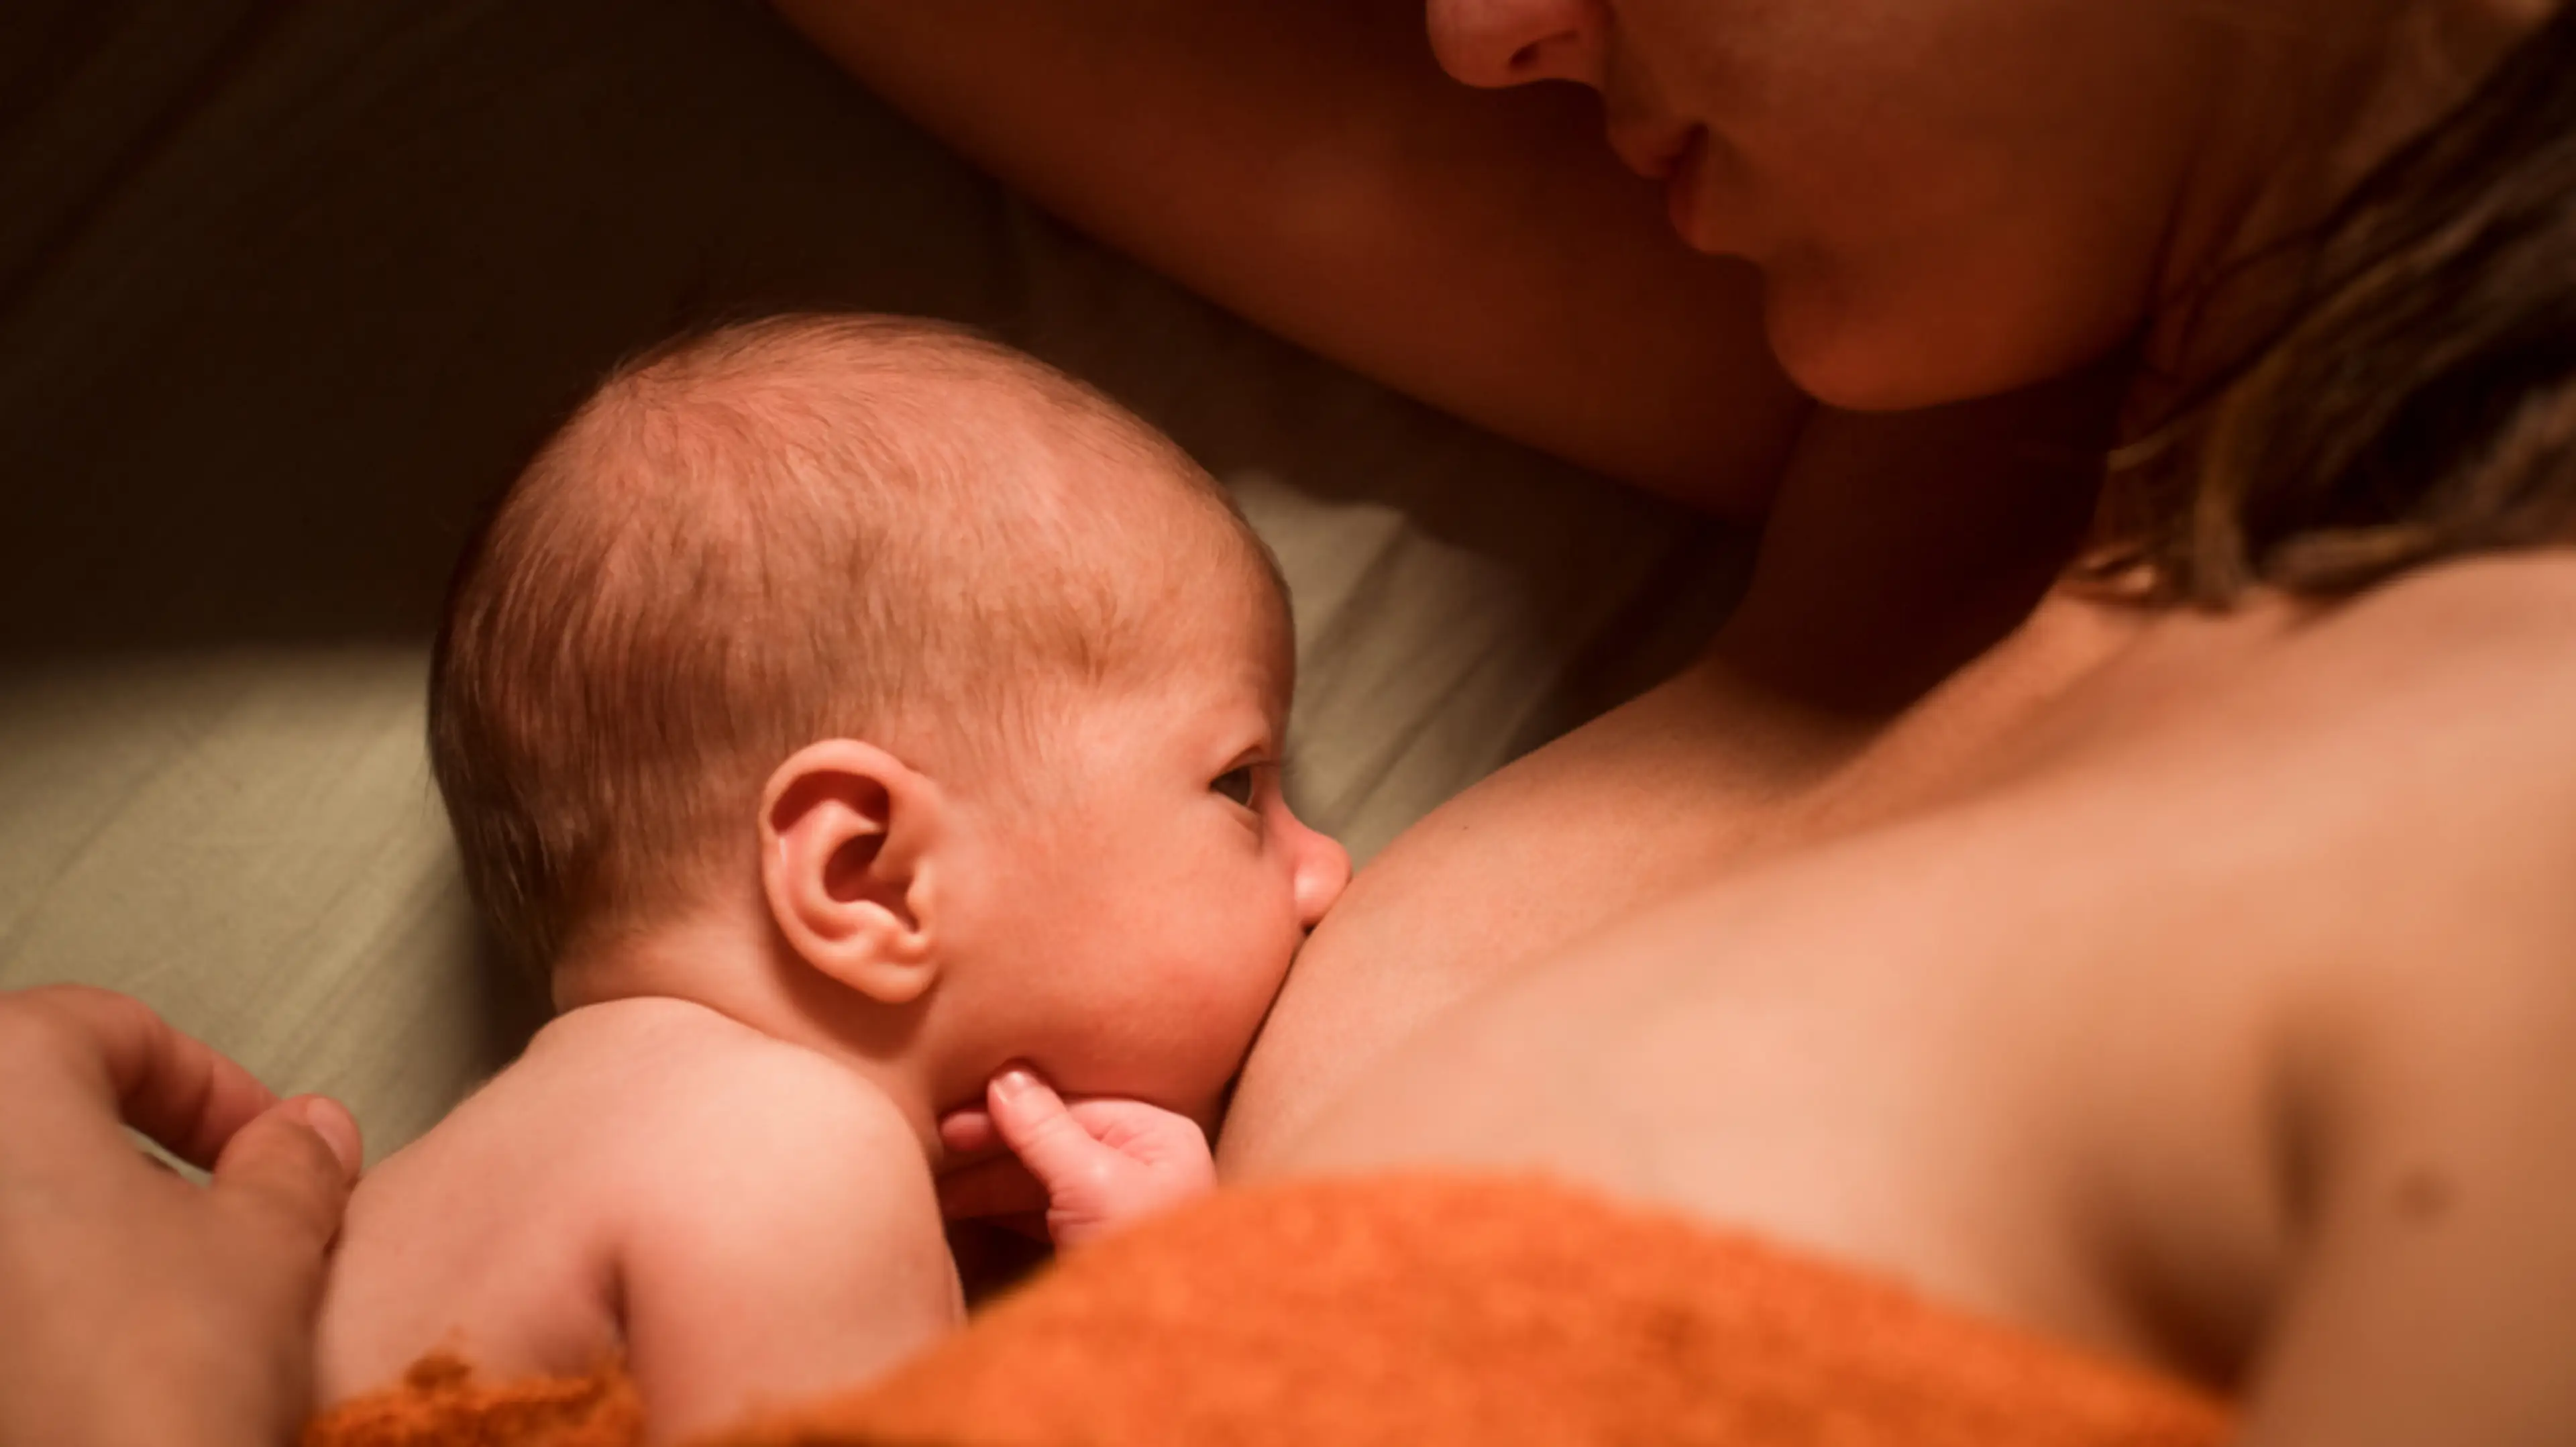 8 Foods To Avoid While Breastfeeding